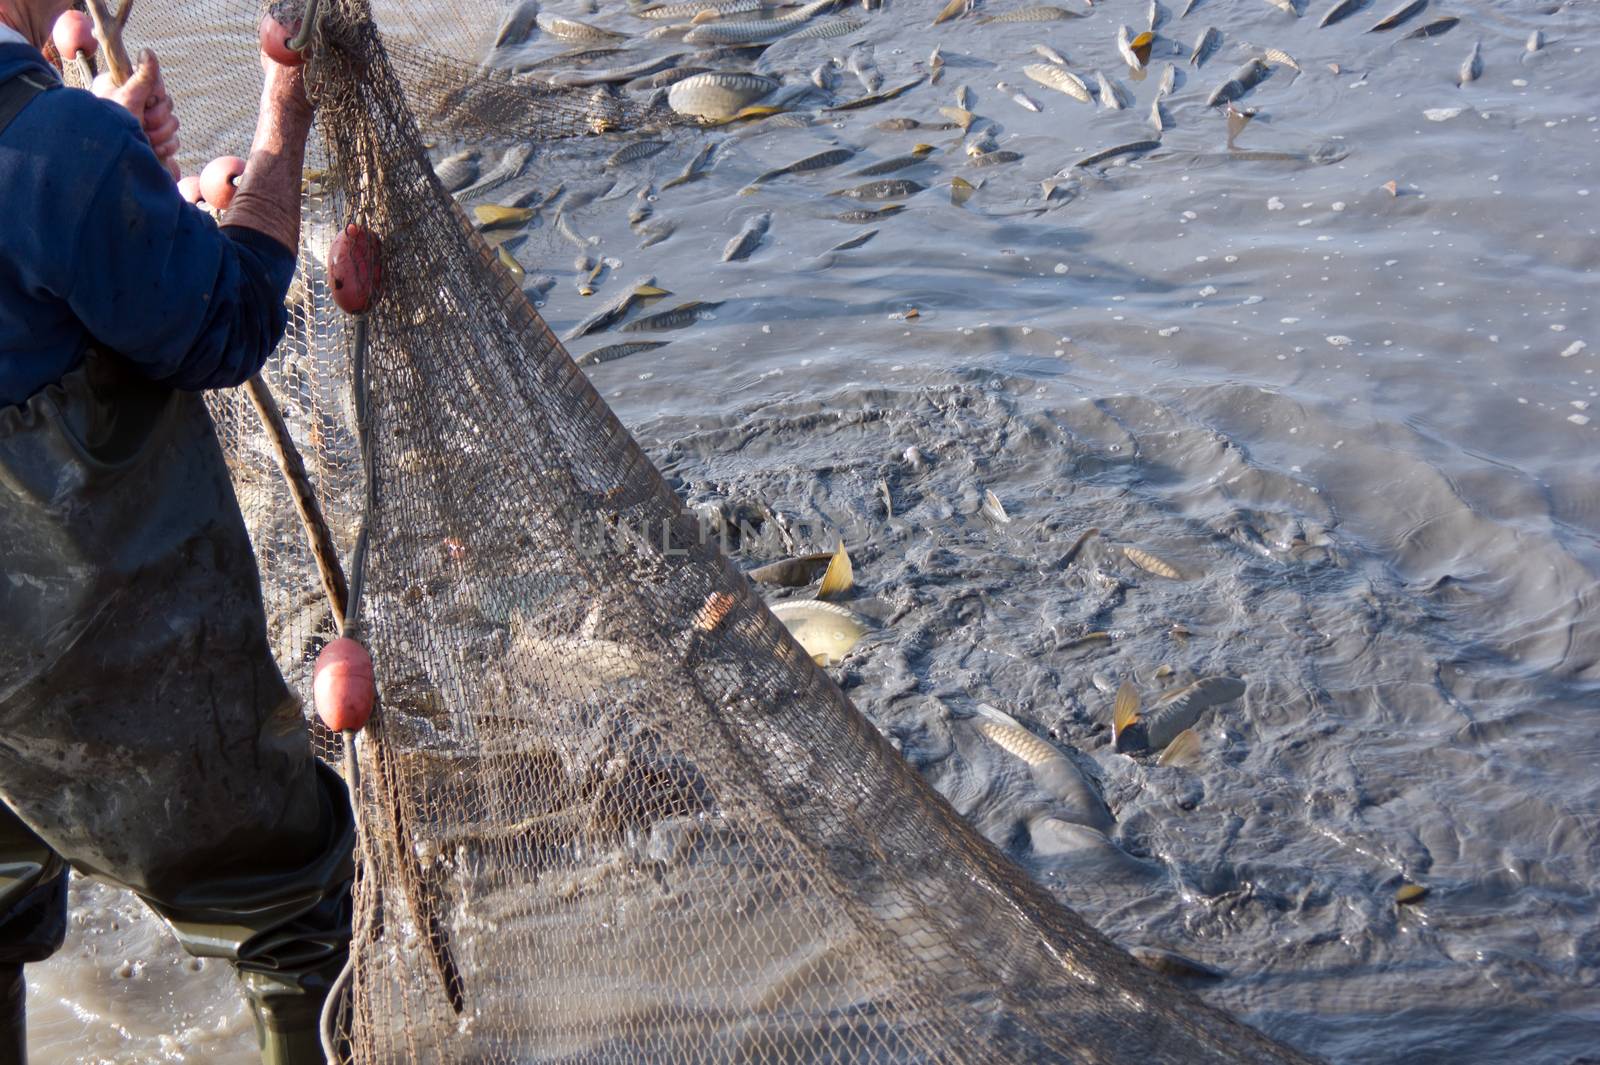 The fishermen's nets would be the carp in the lake.